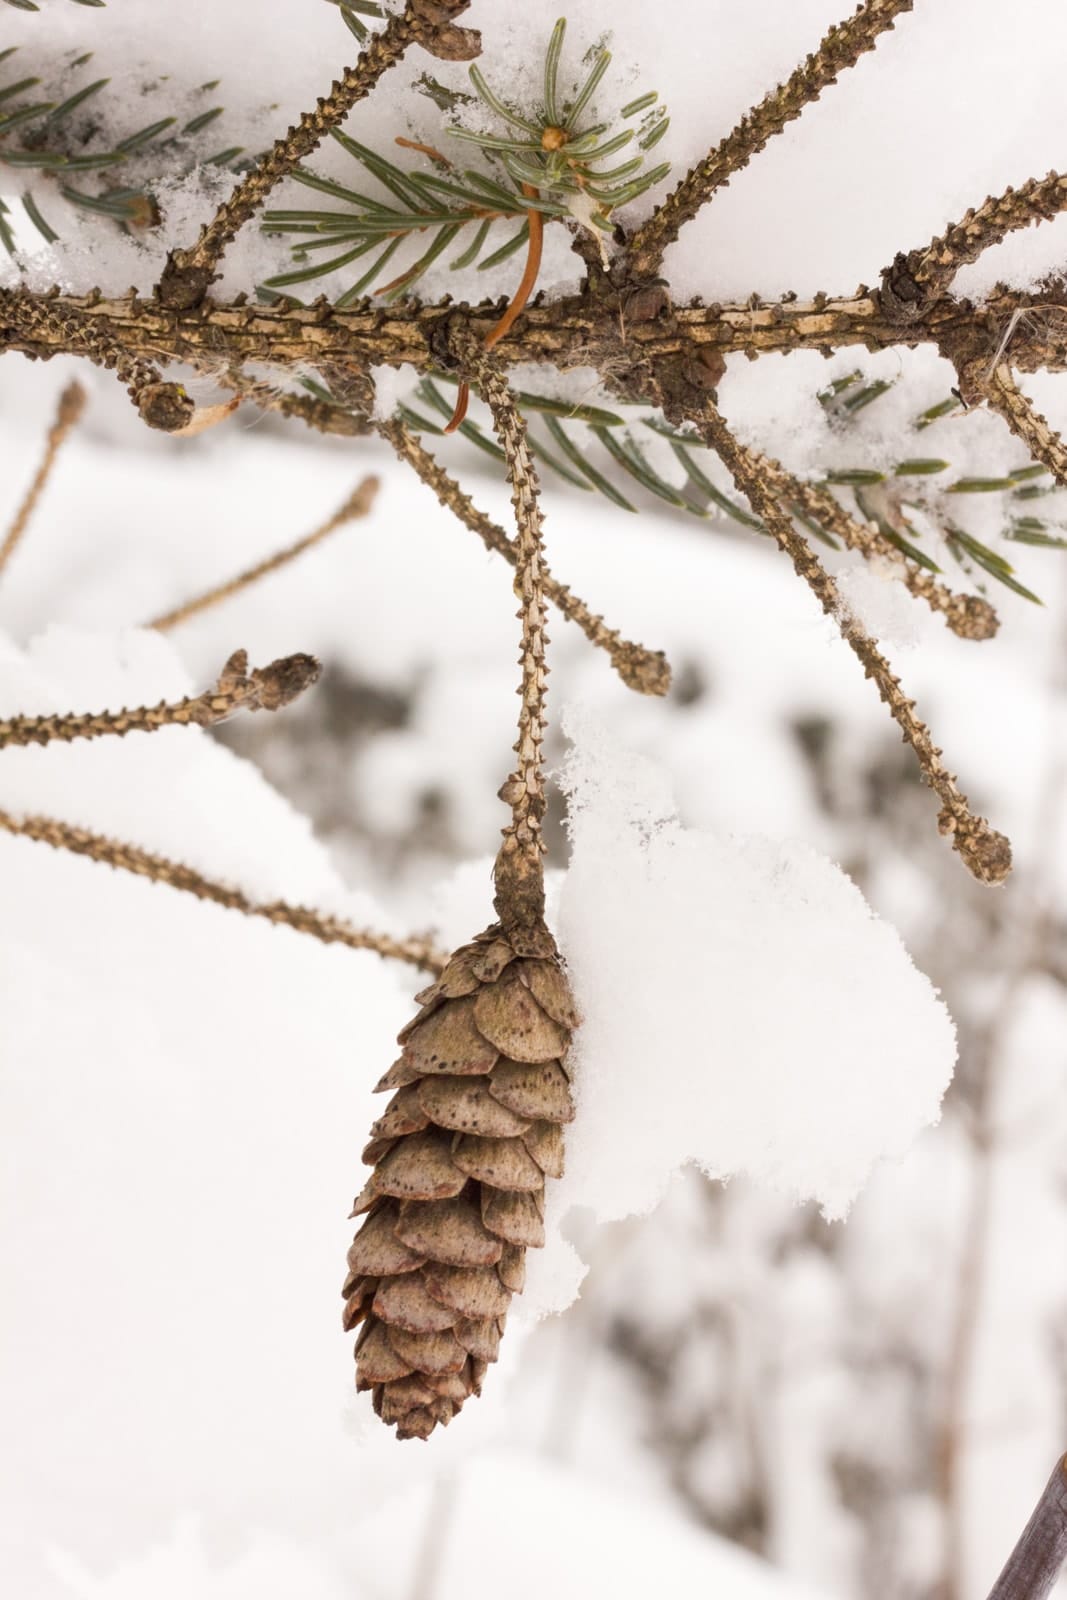 Snow covered pine cone